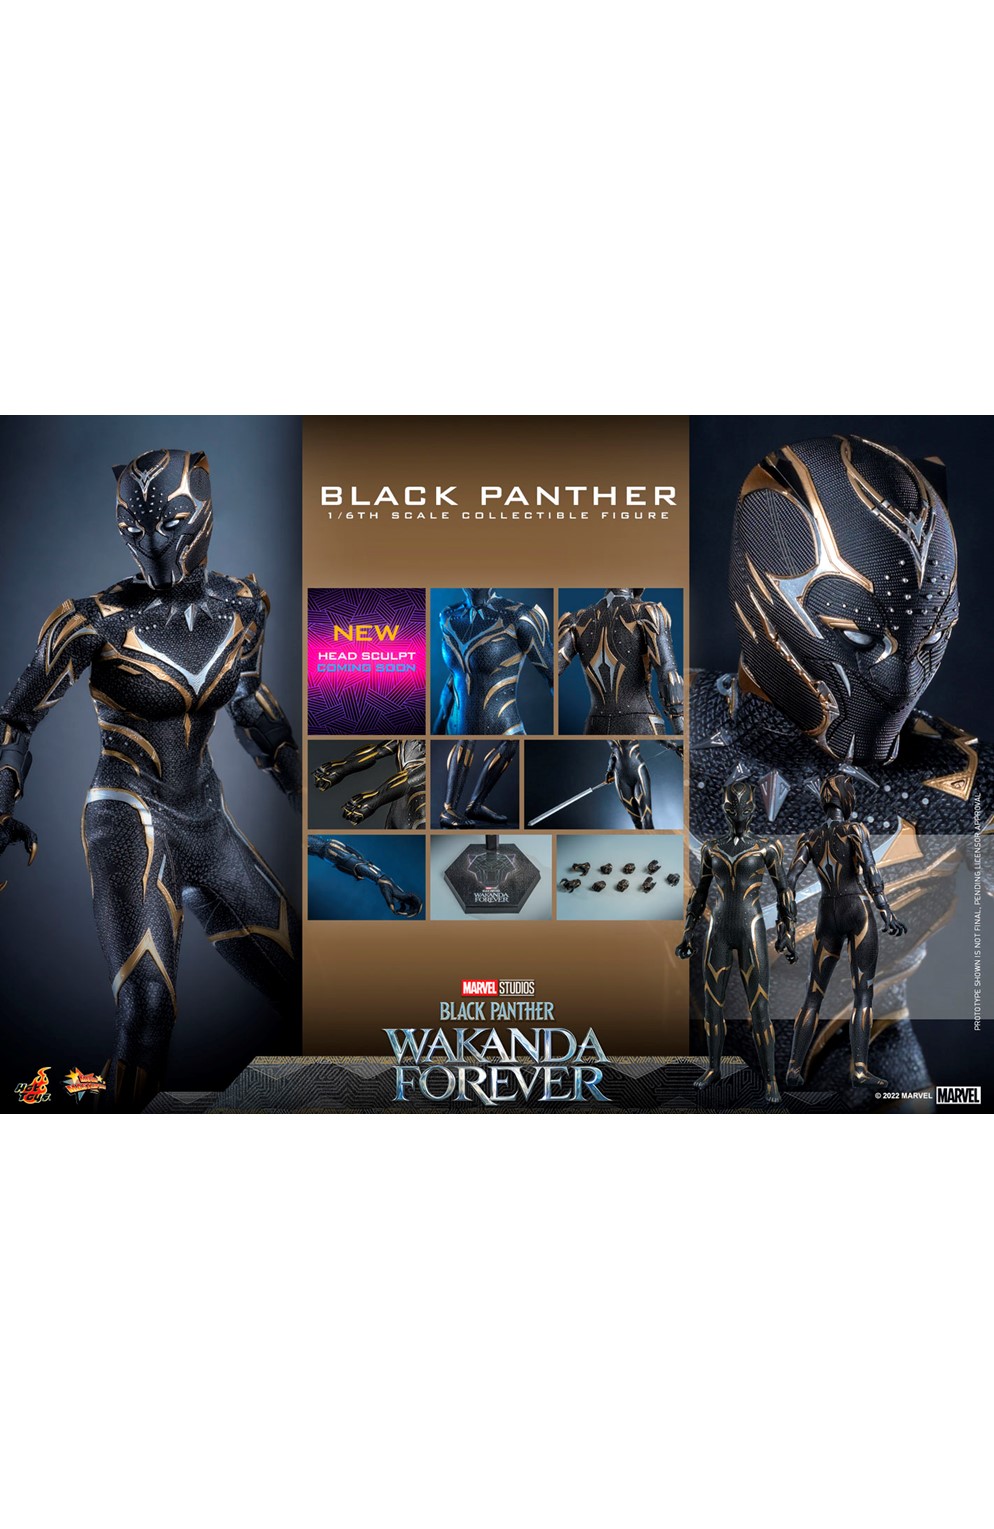 Black Panther (Wakanda Forever) Sixth Scale Figure